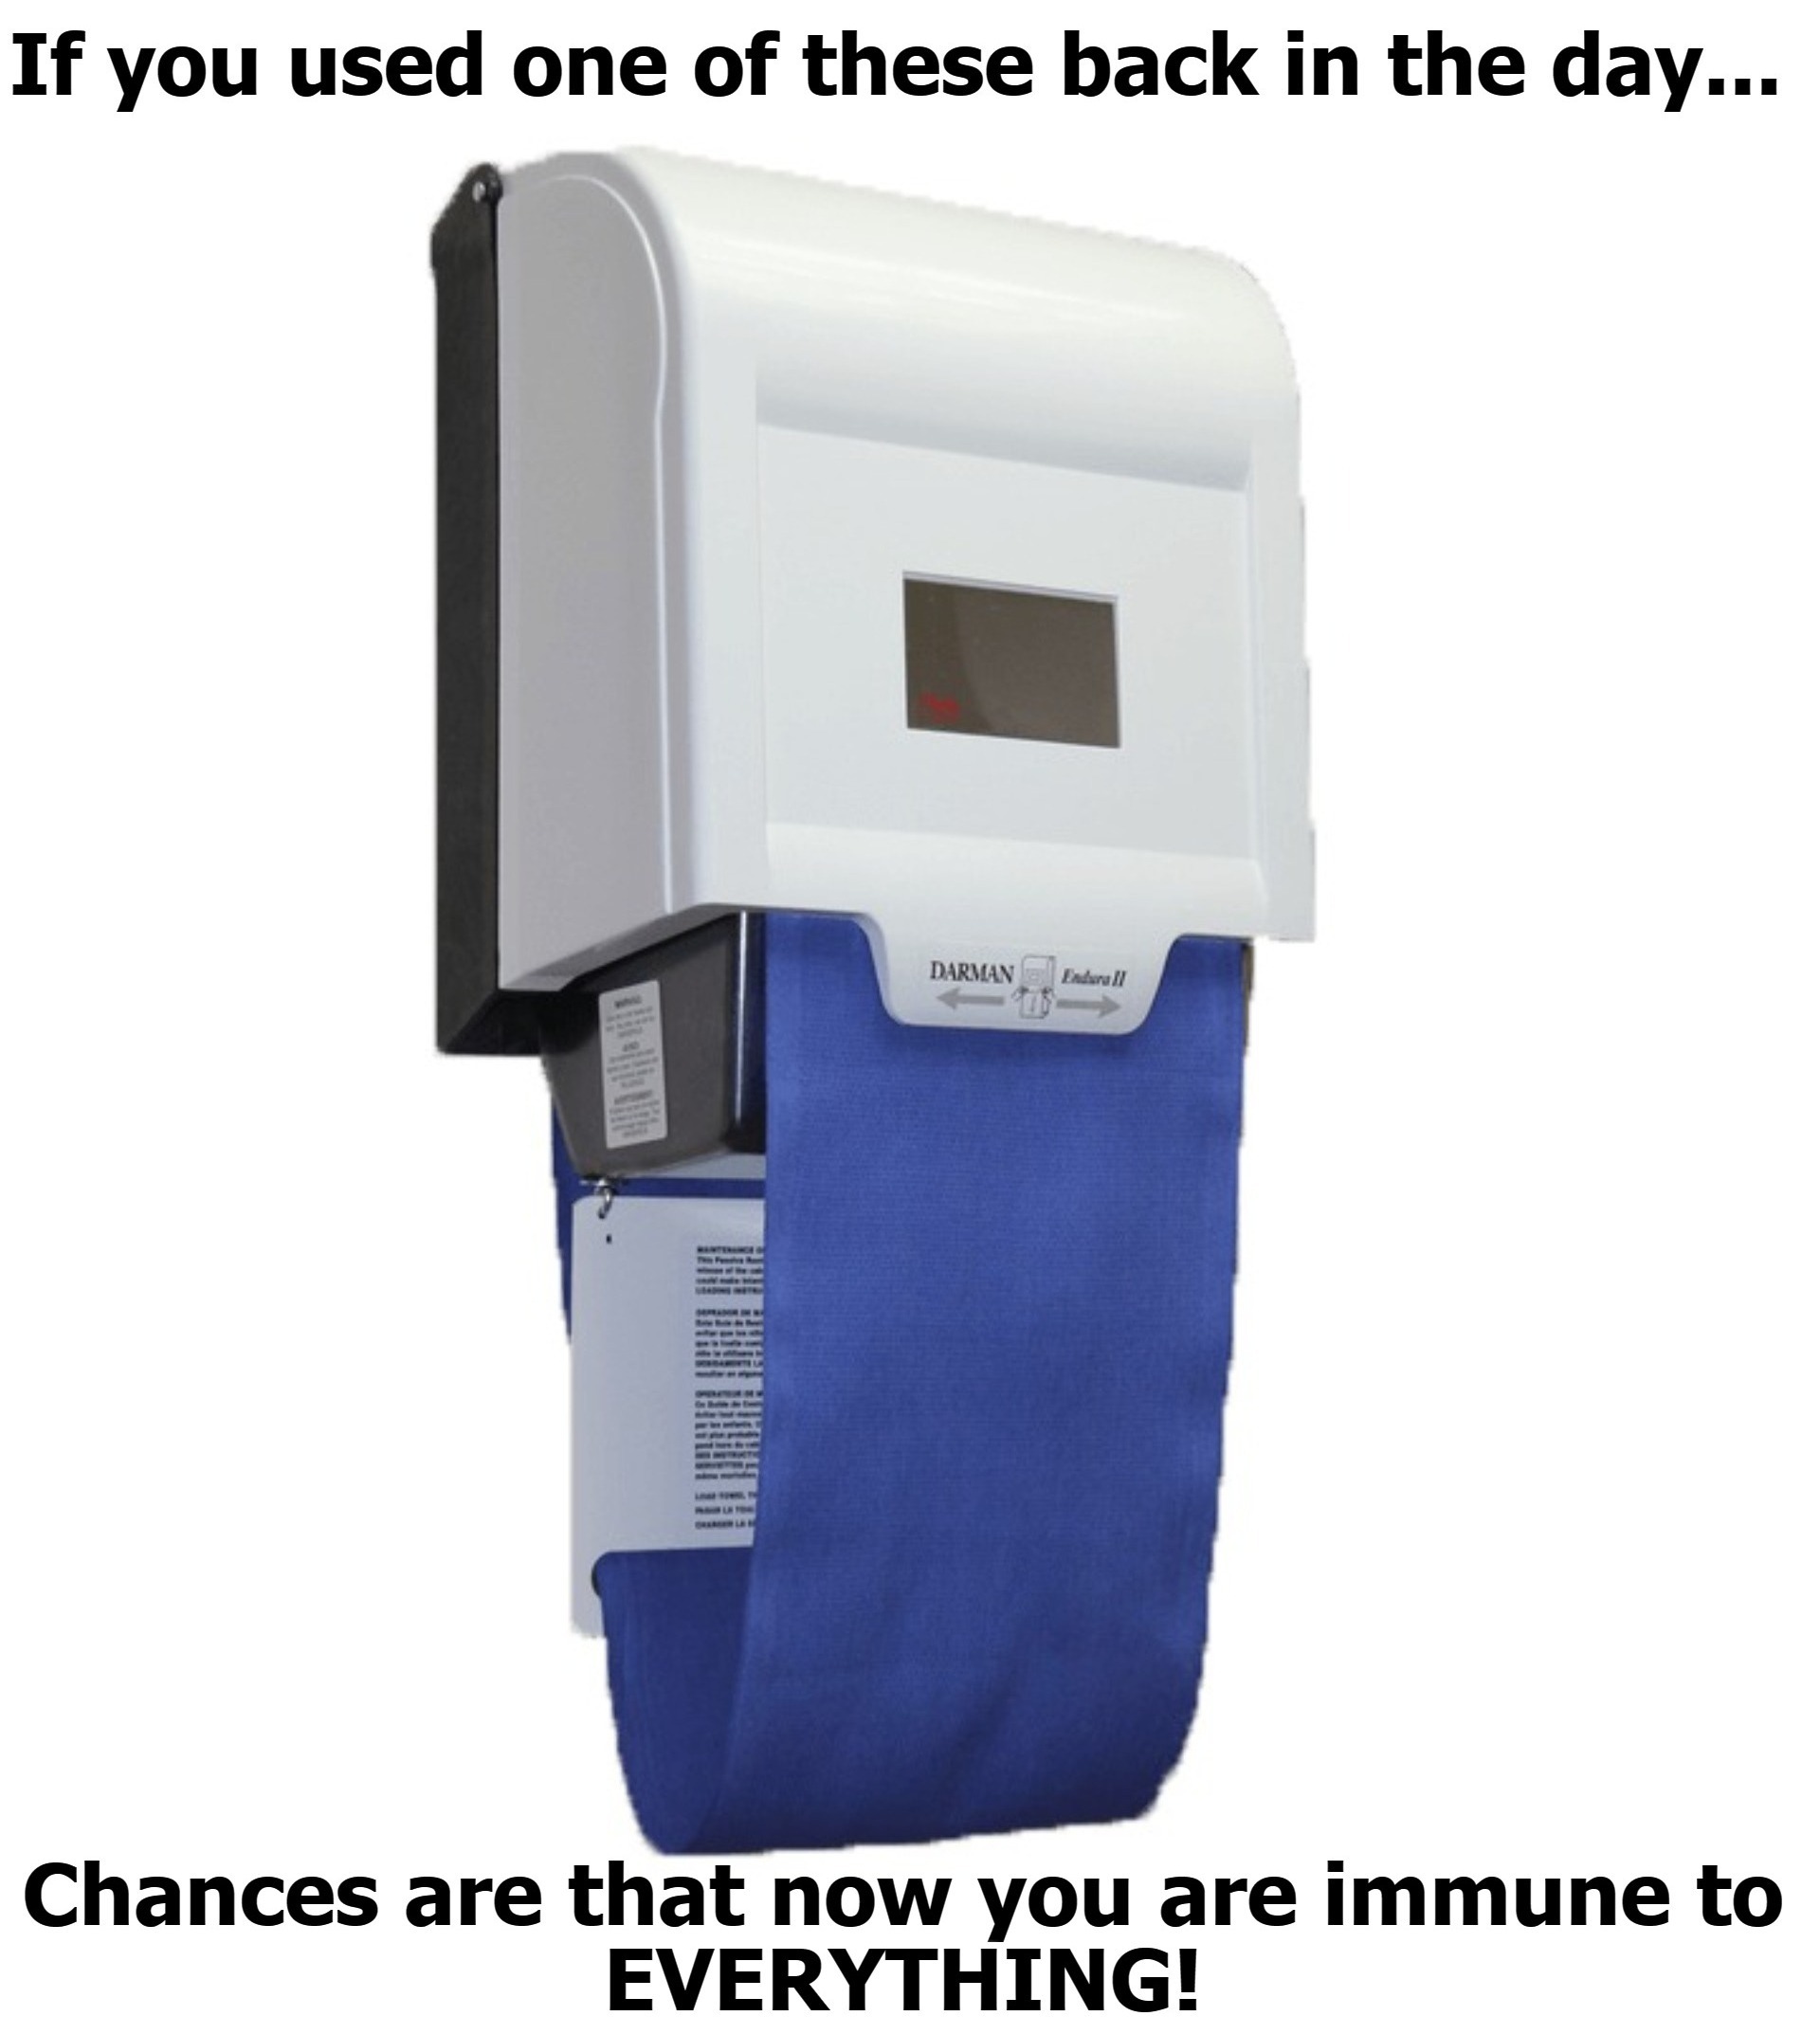 If you used one of these back in the day... | image tagged in cloth towel dispenser,immunology,immunity,covidiots,covidiots wouldn't understand,sheeple | made w/ Imgflip meme maker